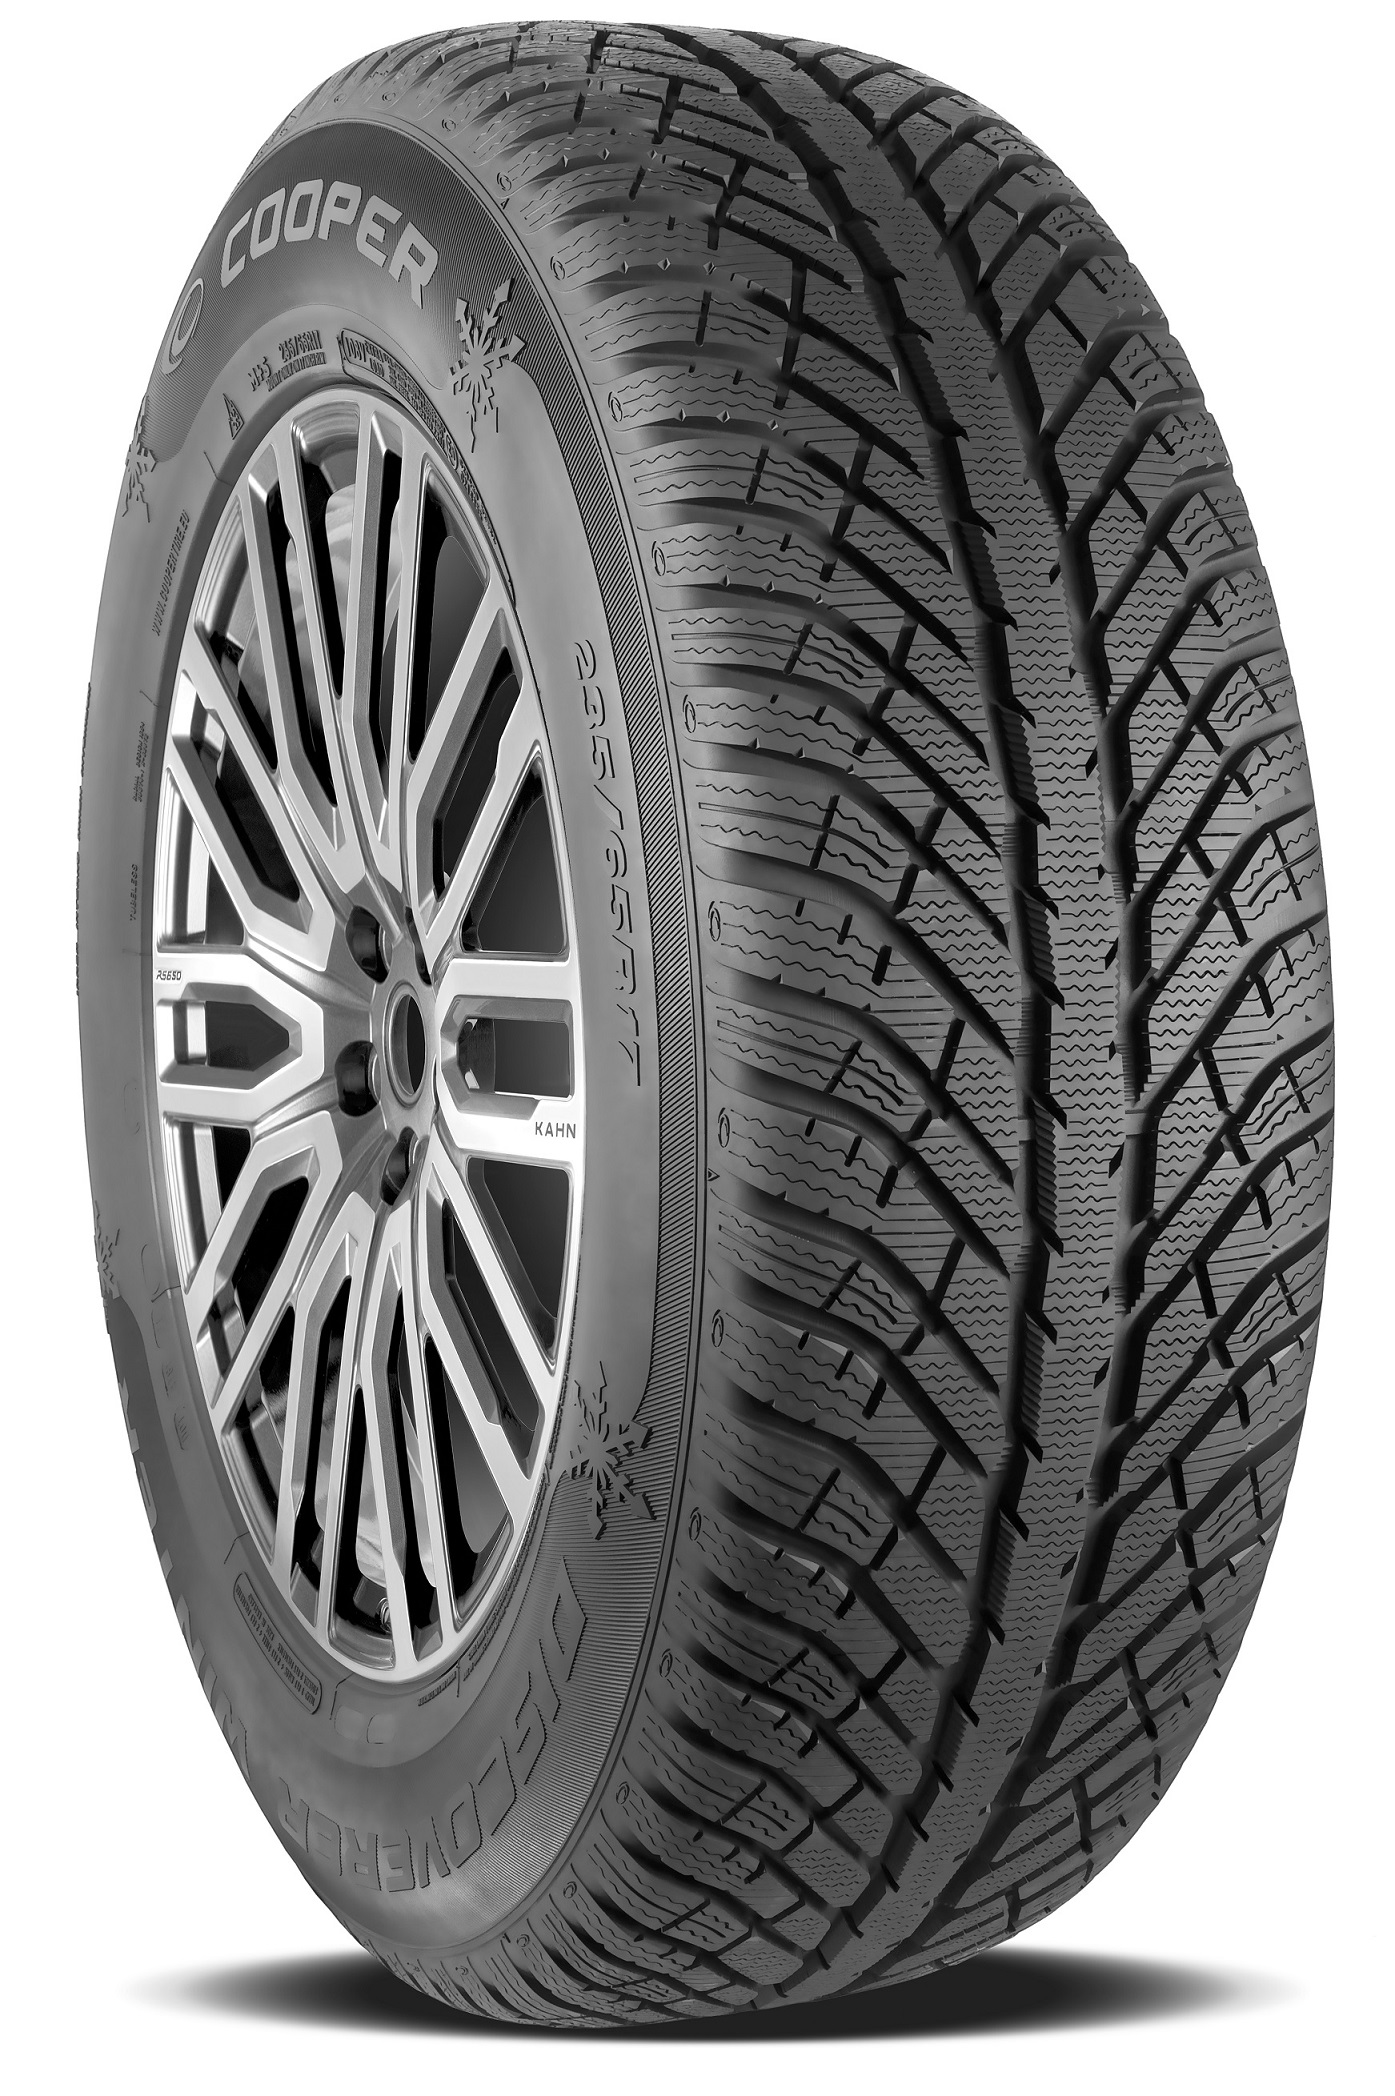 Gomme Nuove Cooper Tyres 205/60 R17 93H DISCOVERER WINTER pneumatici nuovi Invernale